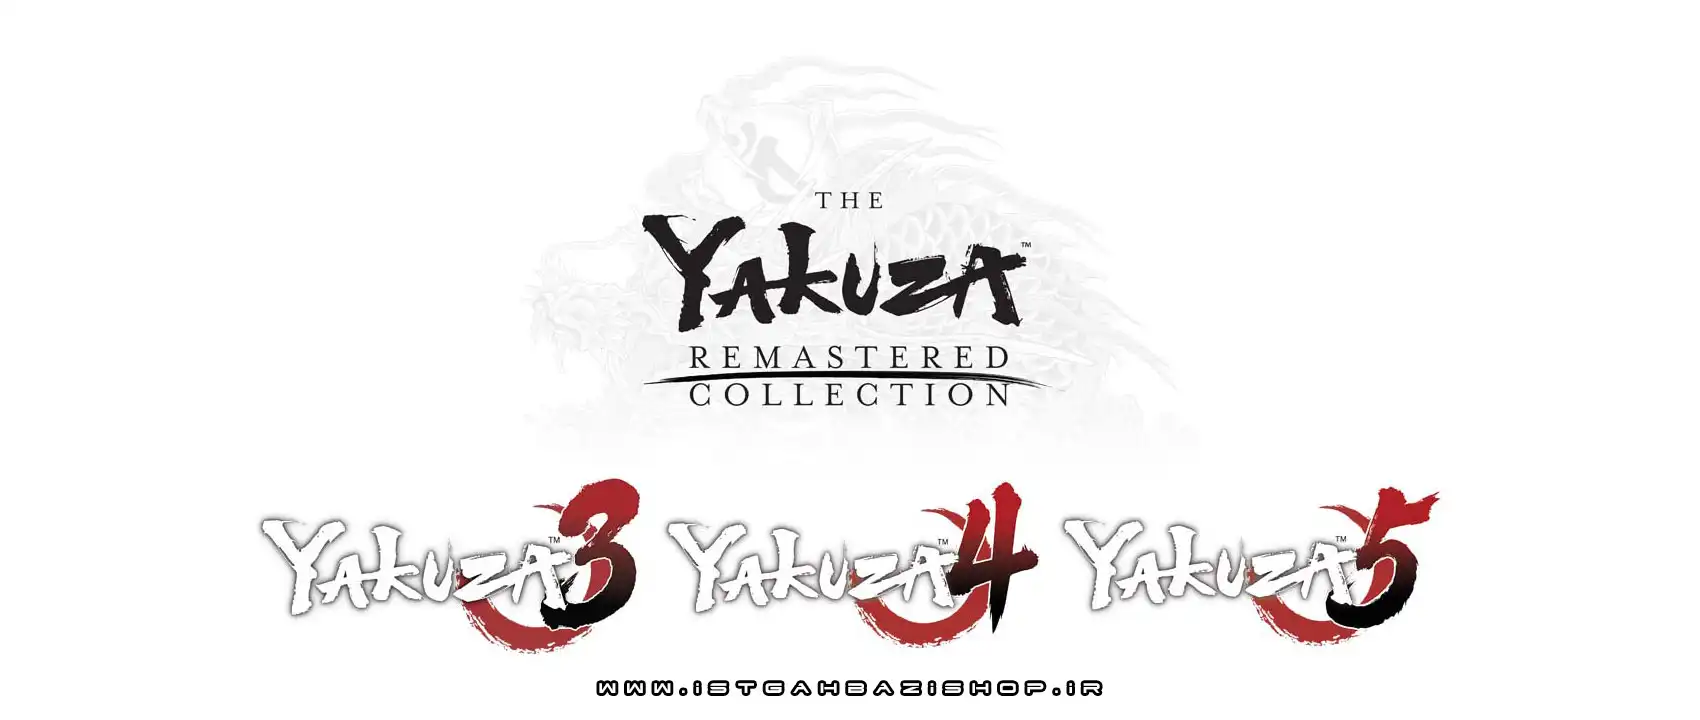 Yakuza Remastered Collection نینتندو سوئیچ